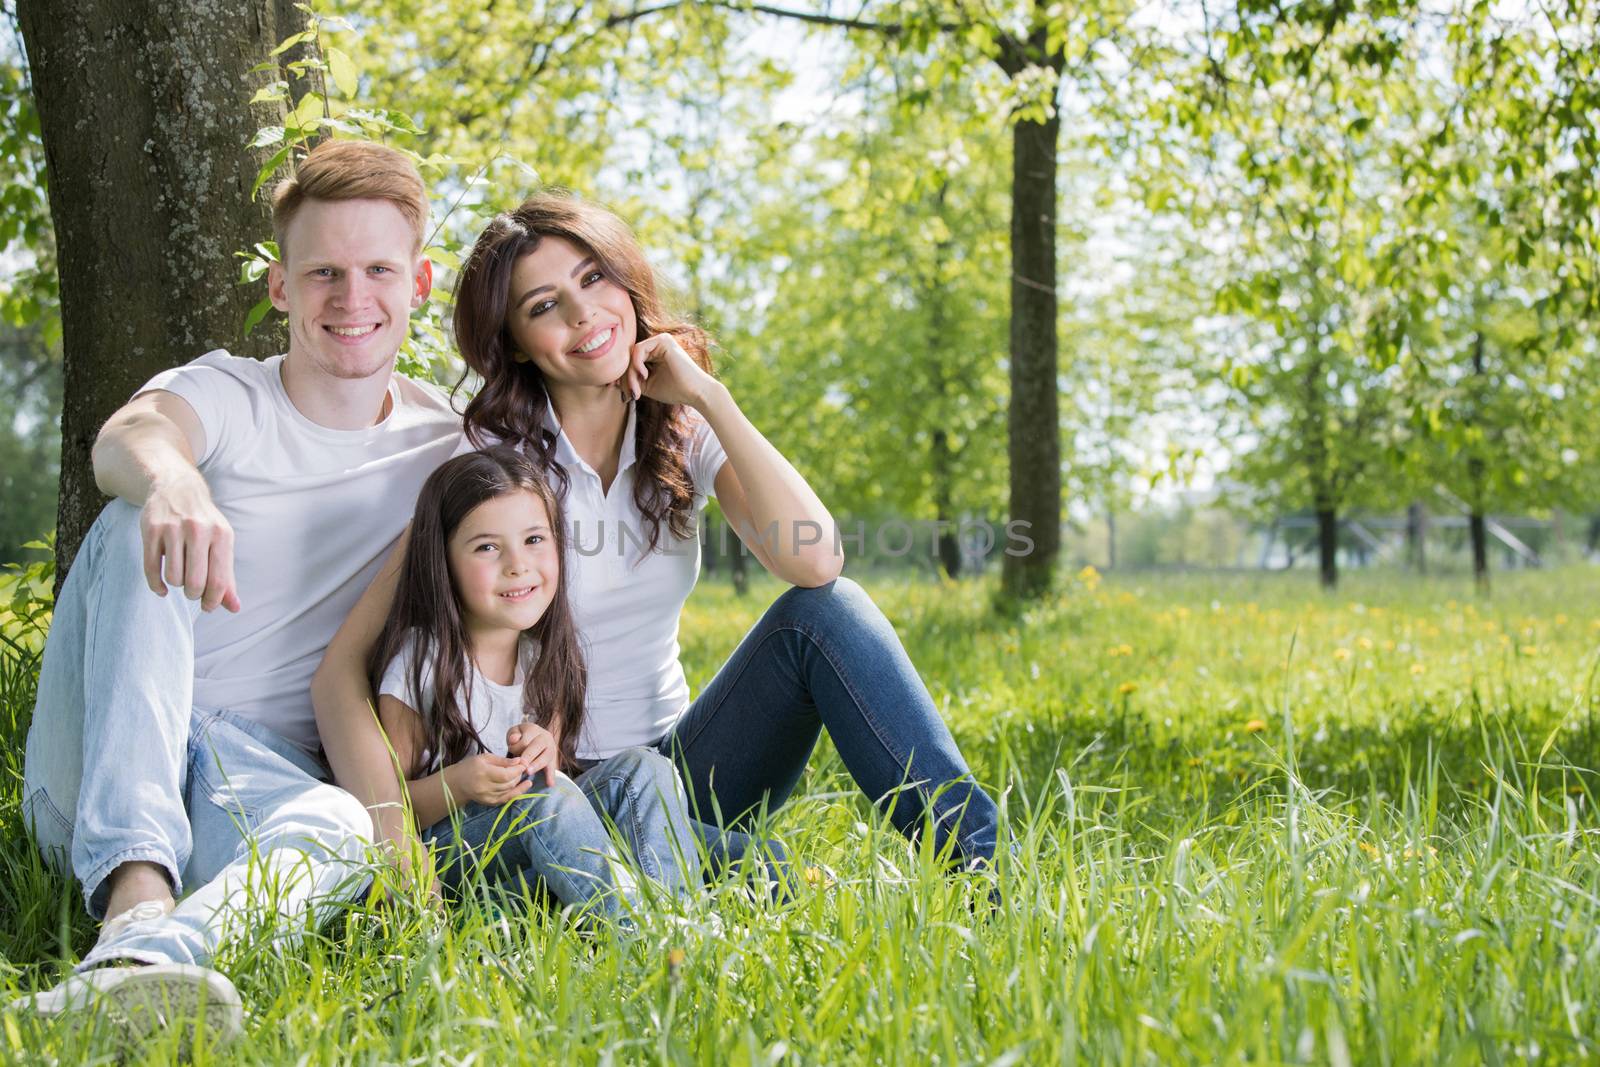 Portrait of happy family sitting on grass under a tree in park on a sunny day